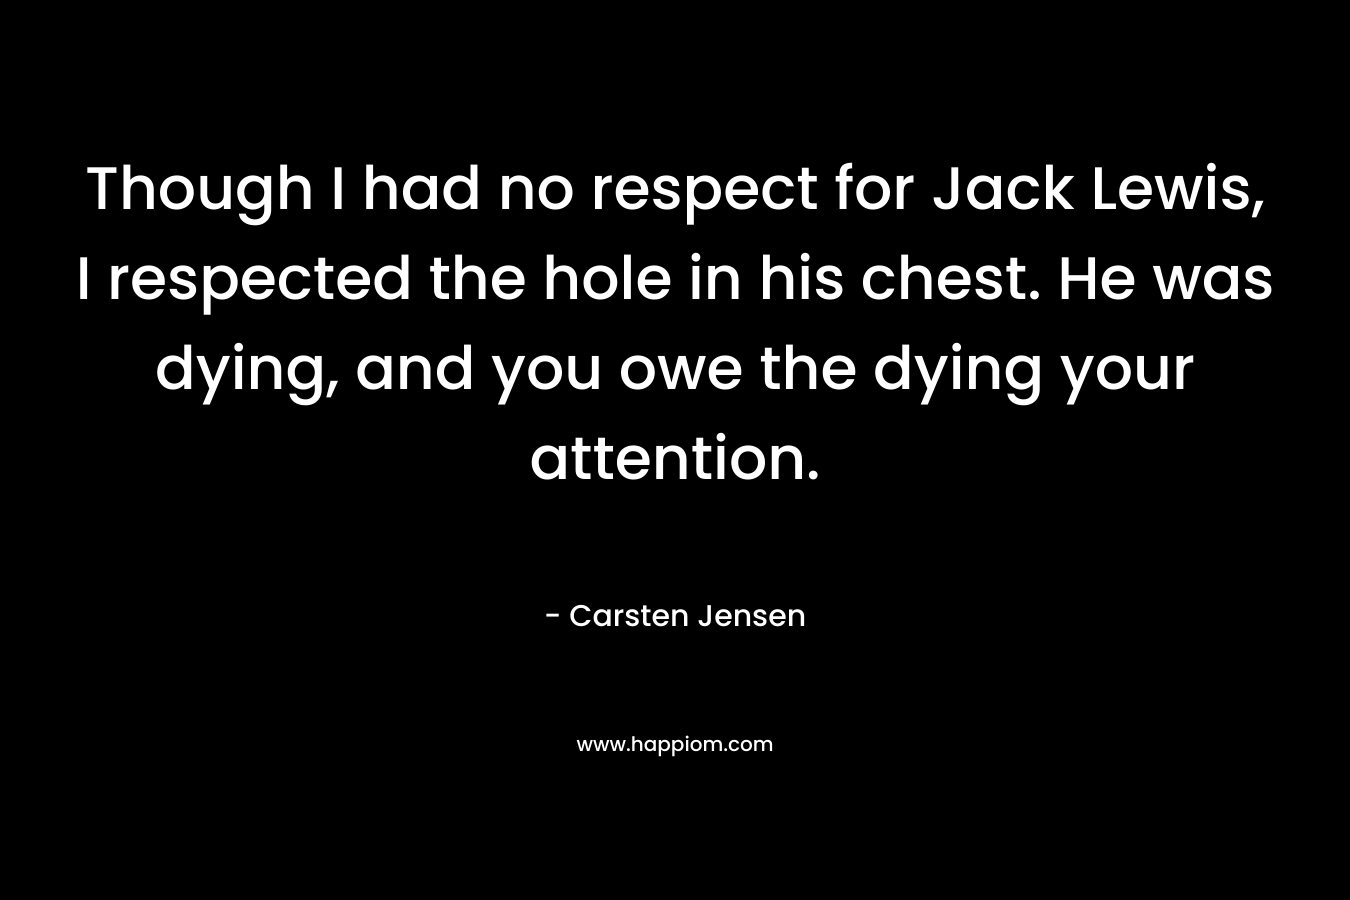 Though I had no respect for Jack Lewis, I respected the hole in his chest. He was dying, and you owe the dying your attention. – Carsten Jensen